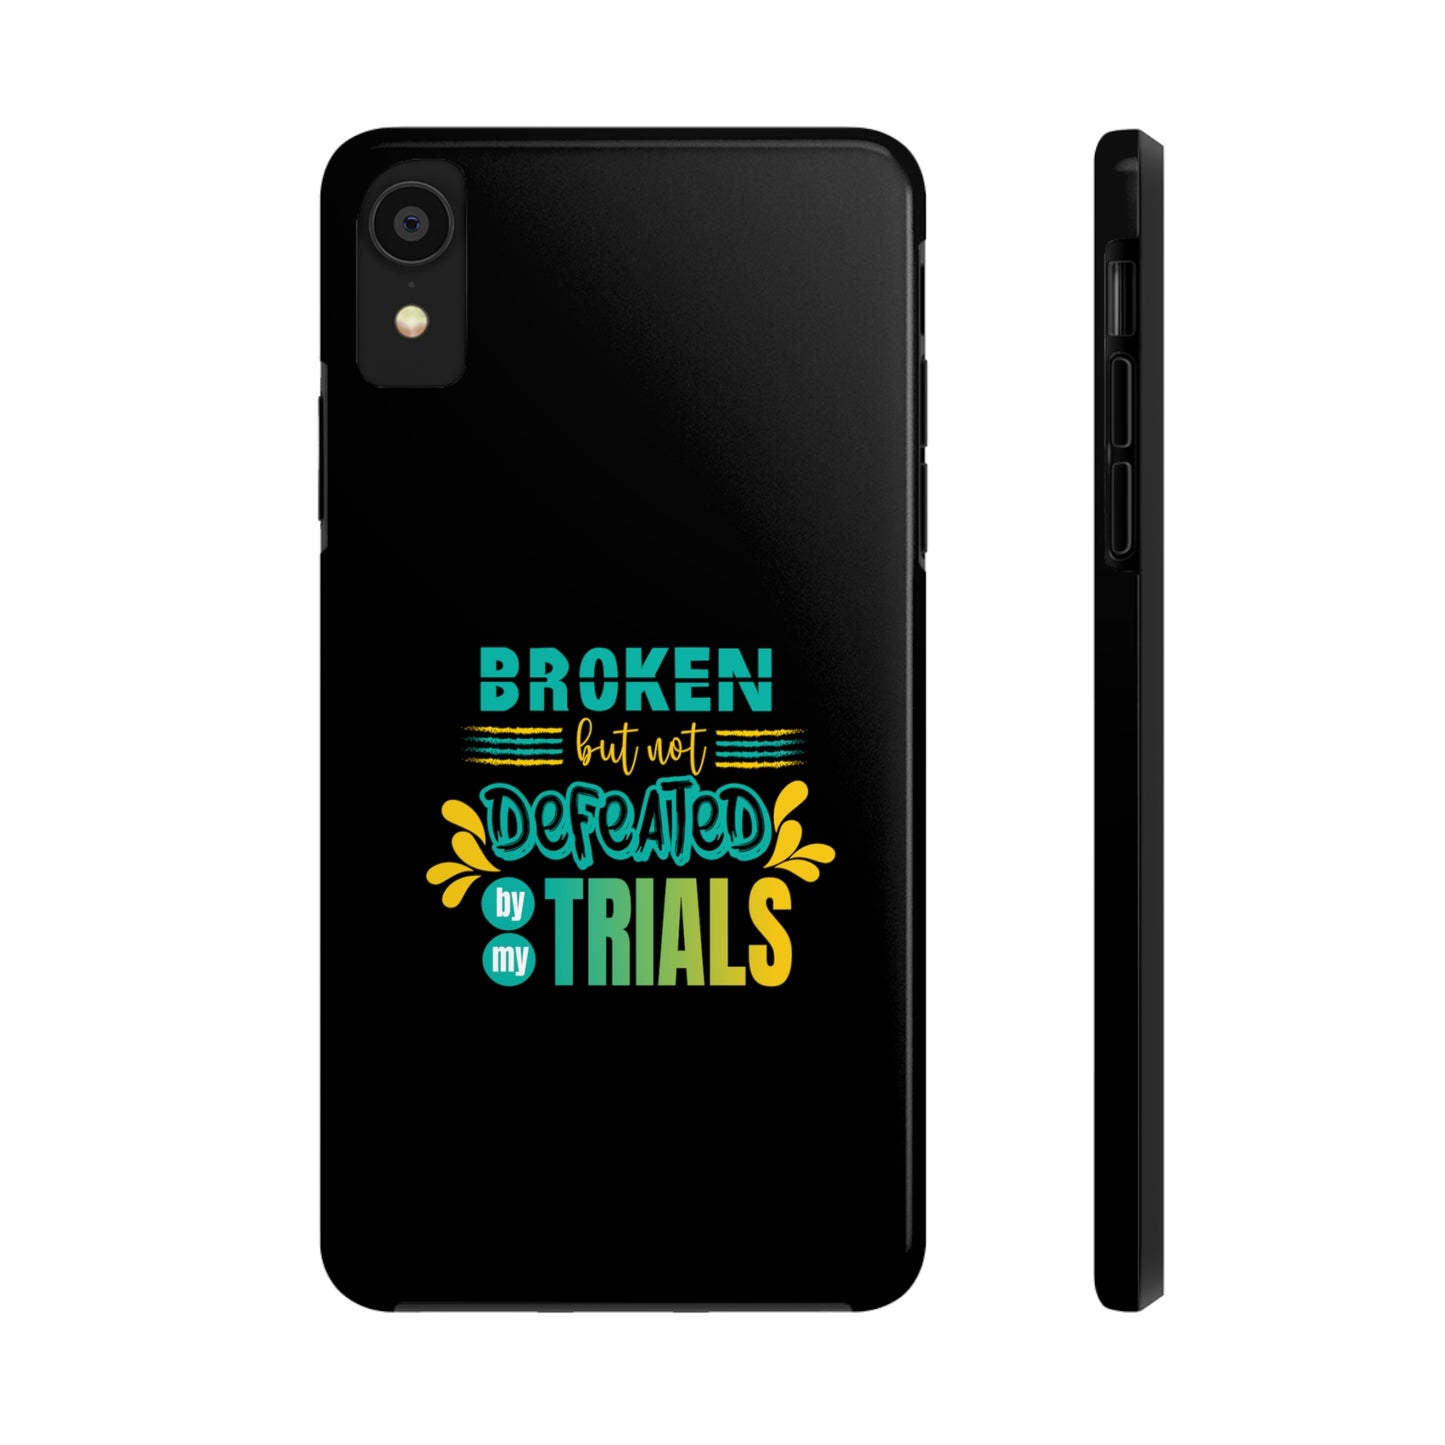 Broken But Not Defeated By My Trials Tough Phone Cases, Case-Mate